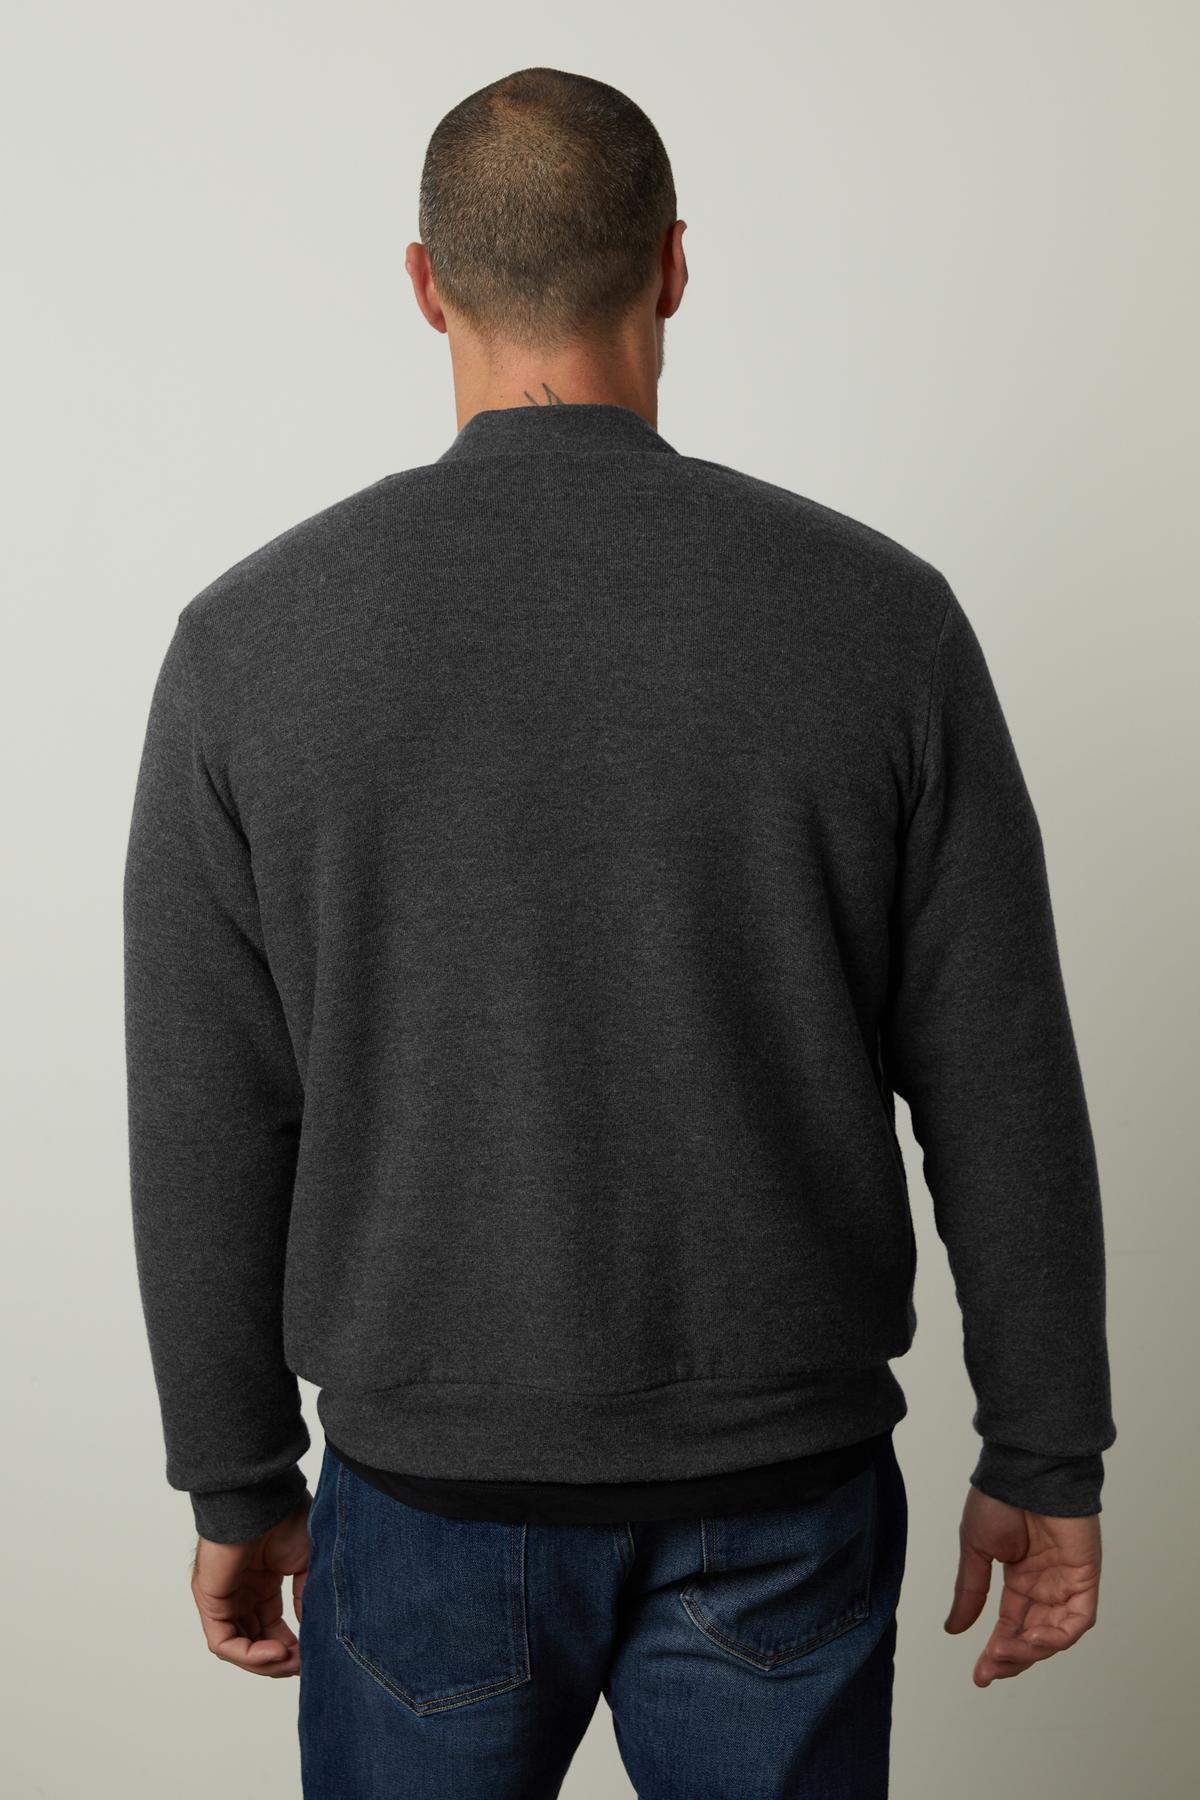 The back view of a man wearing a Velvet by Graham & Spencer MILES ZIP-UP JACKET with a cozy sherpa lining.-35662690222273